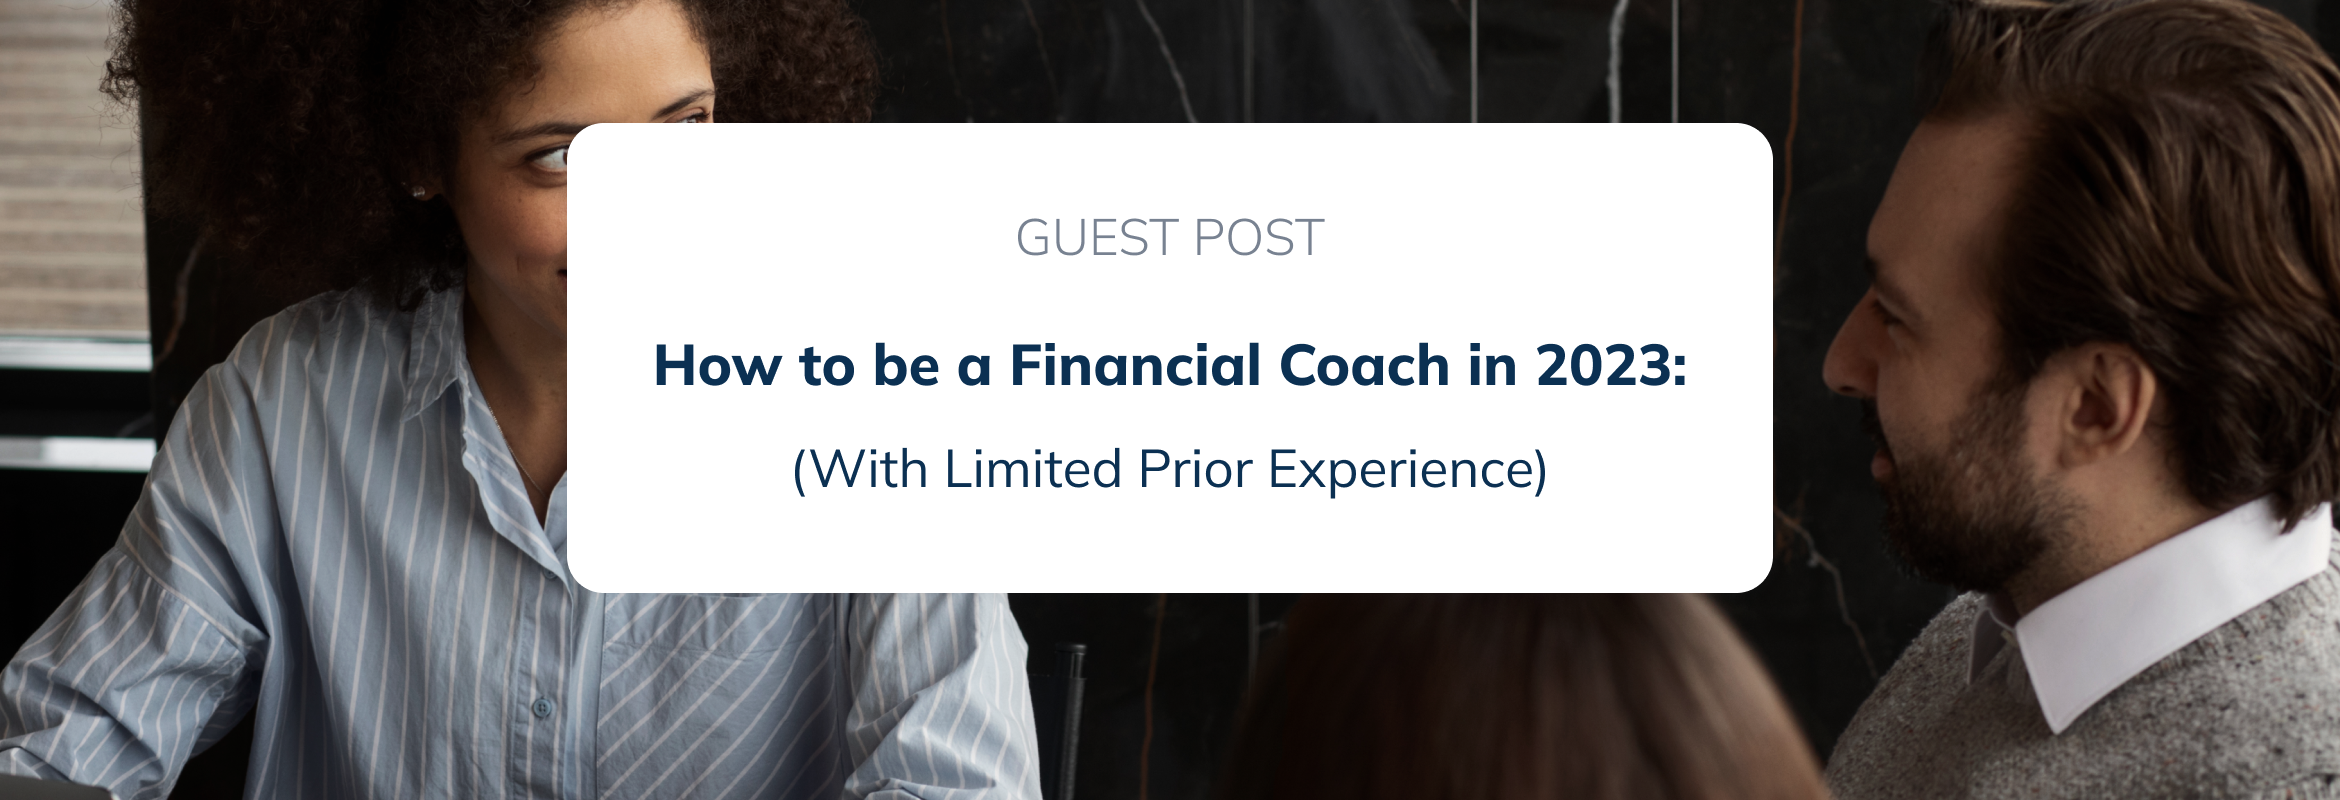 how to be a financial coach